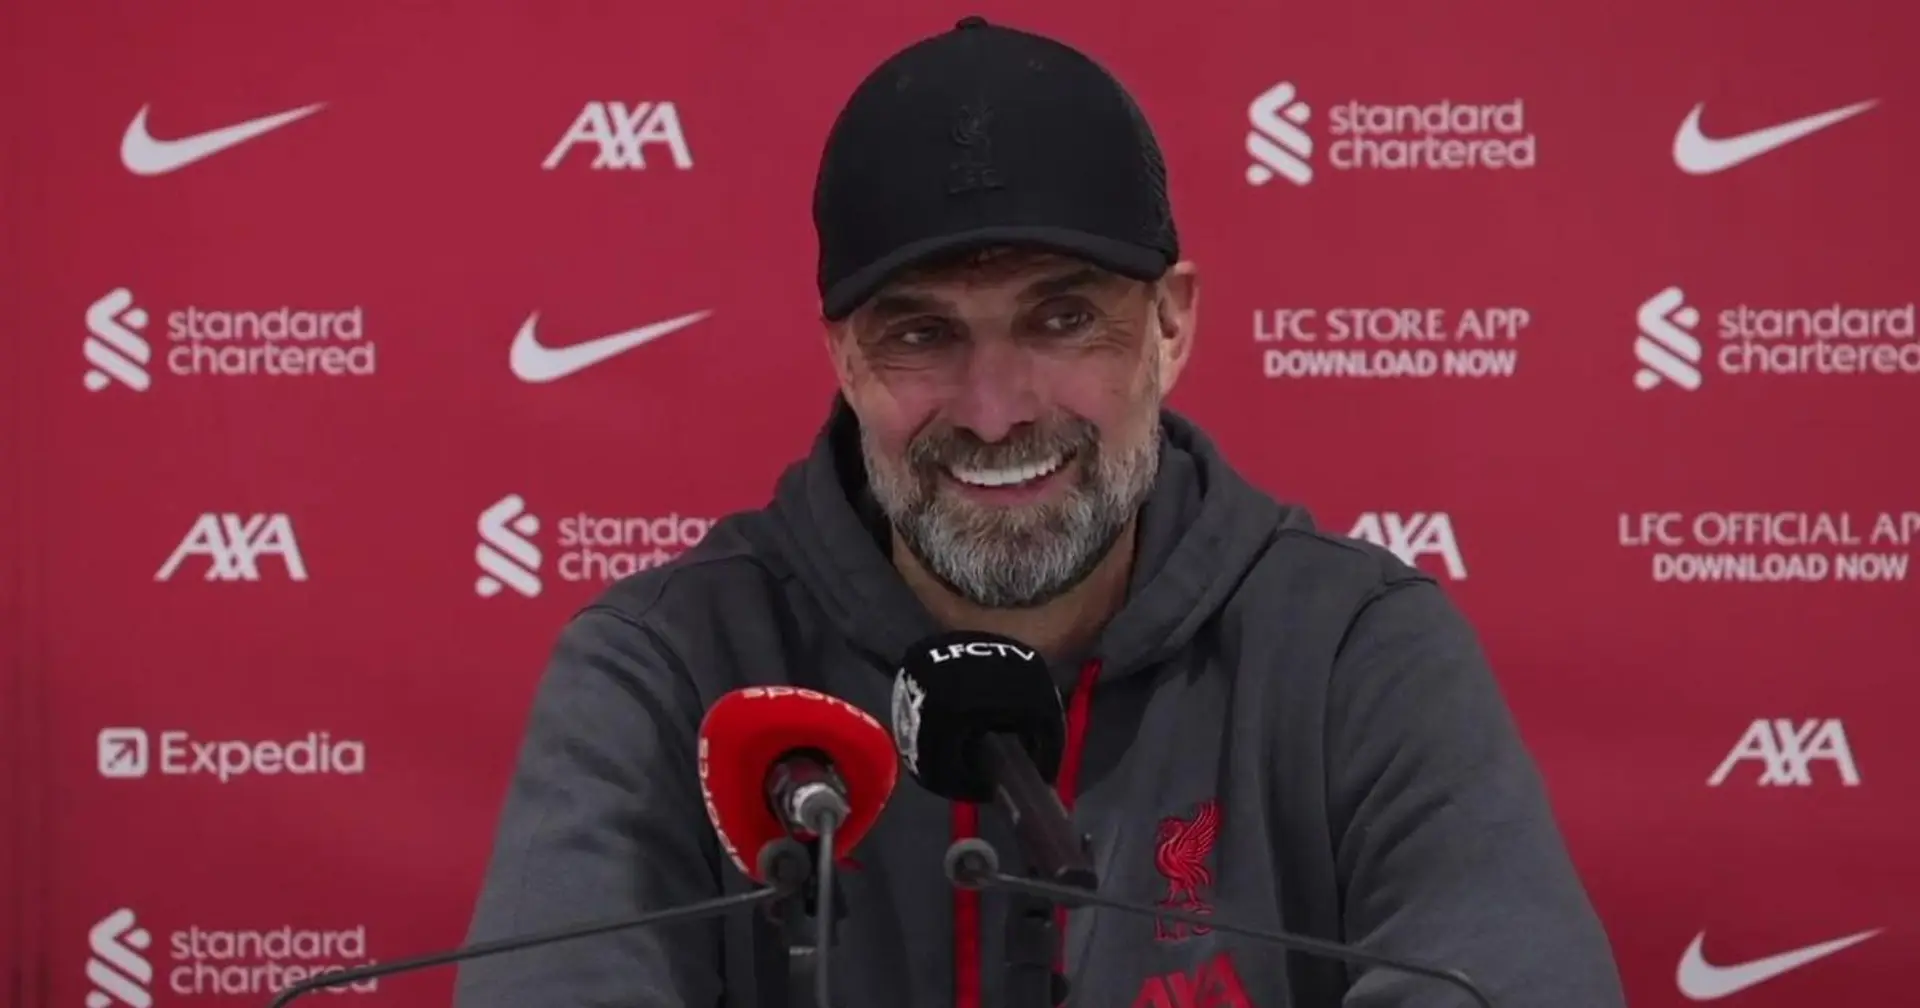 Jurgen Klopp on Fulham win: 'For 80 minutes we played a really good game'